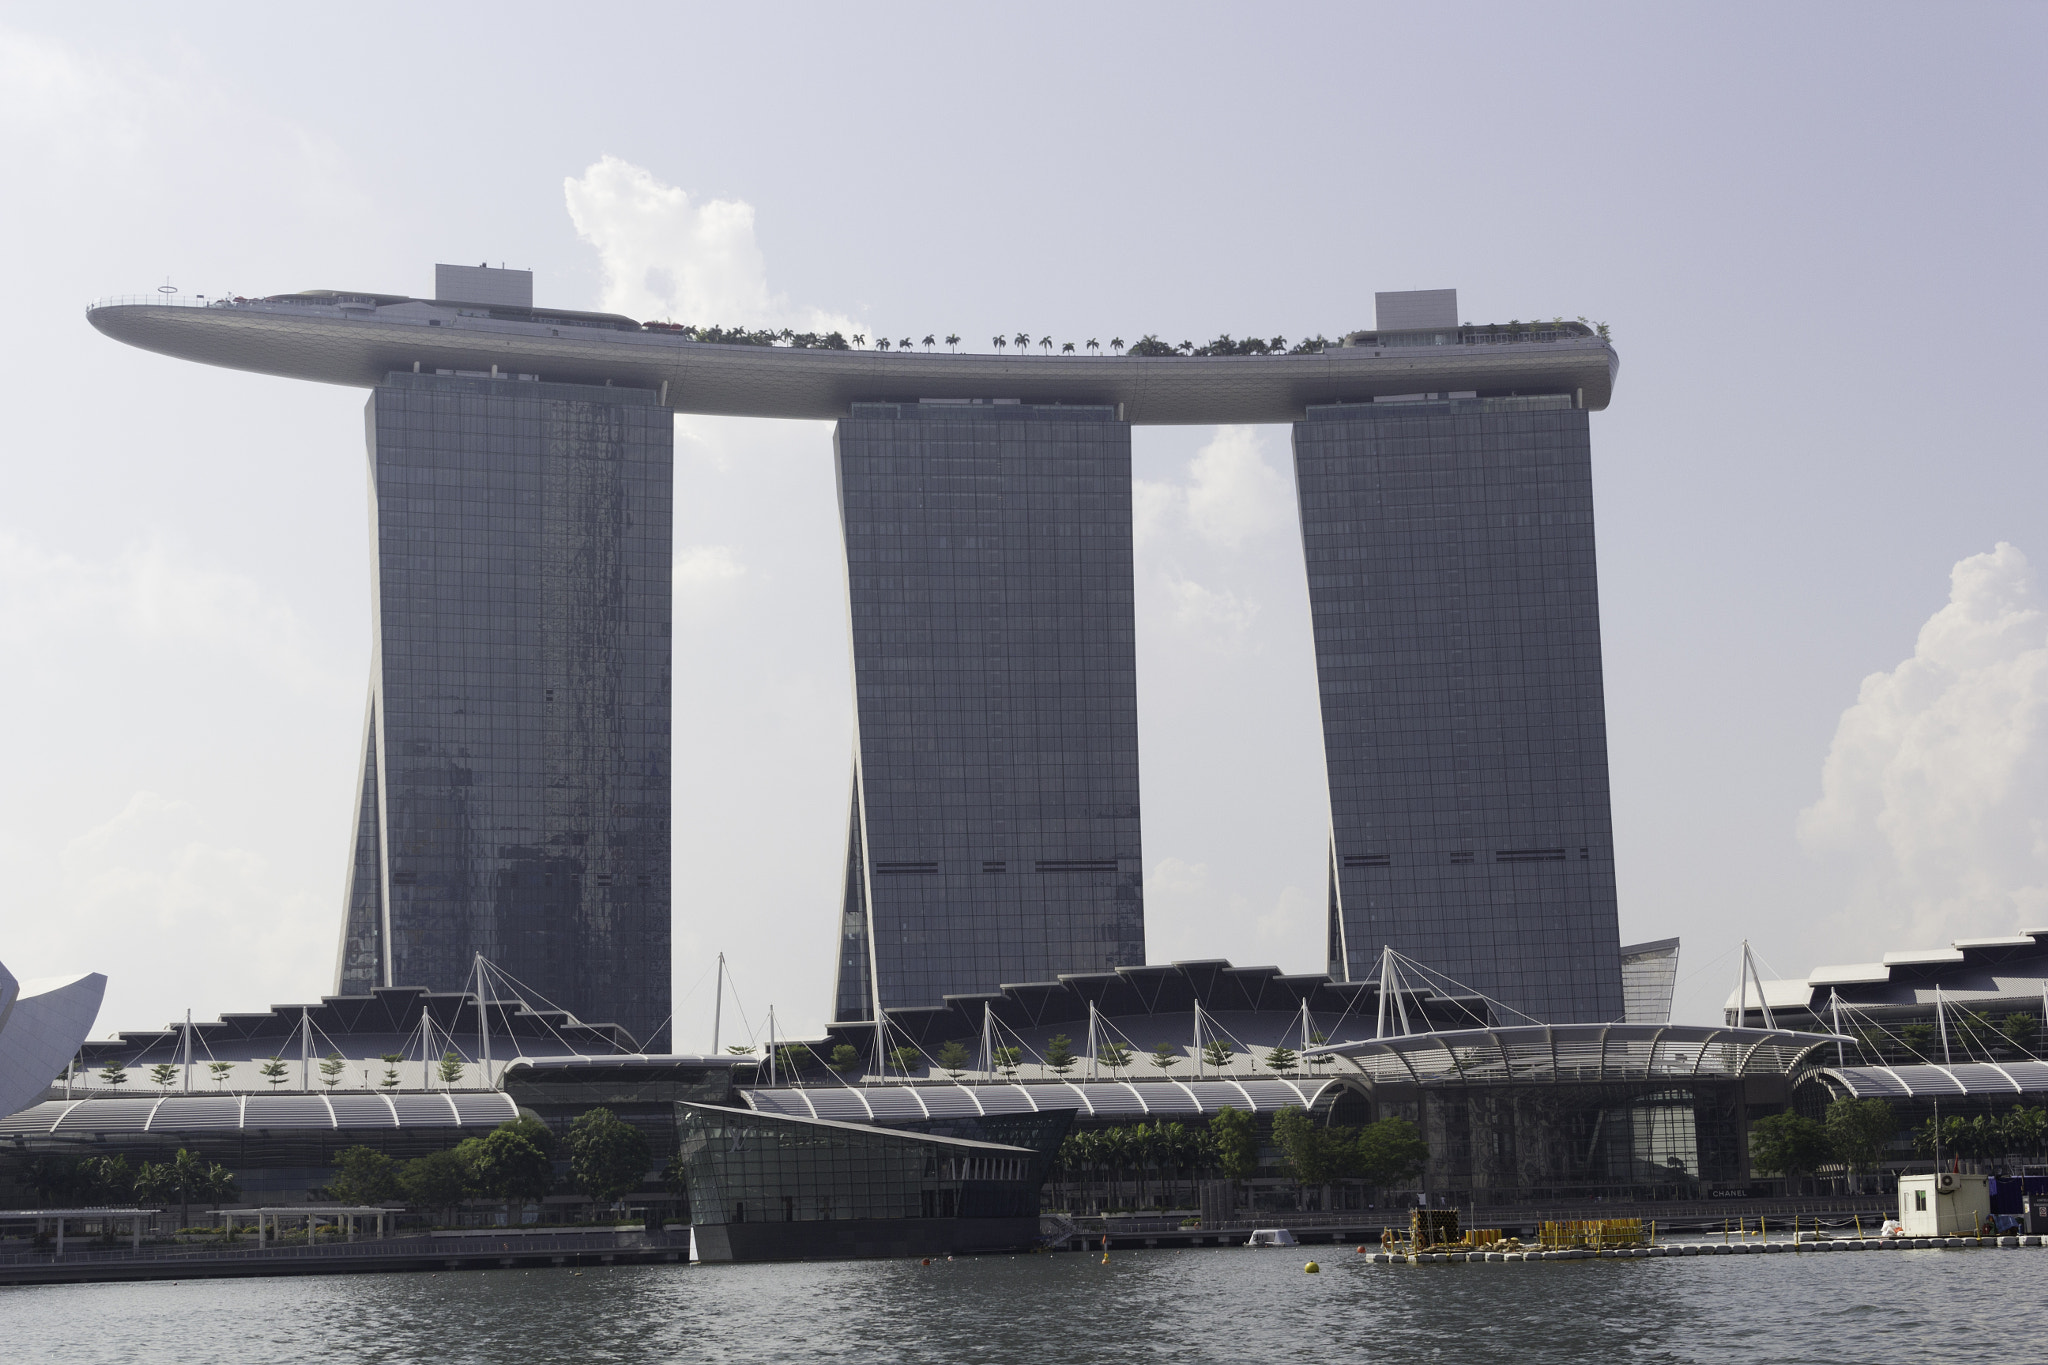 The towers of the iconic Marina Bay Sands in Singapore